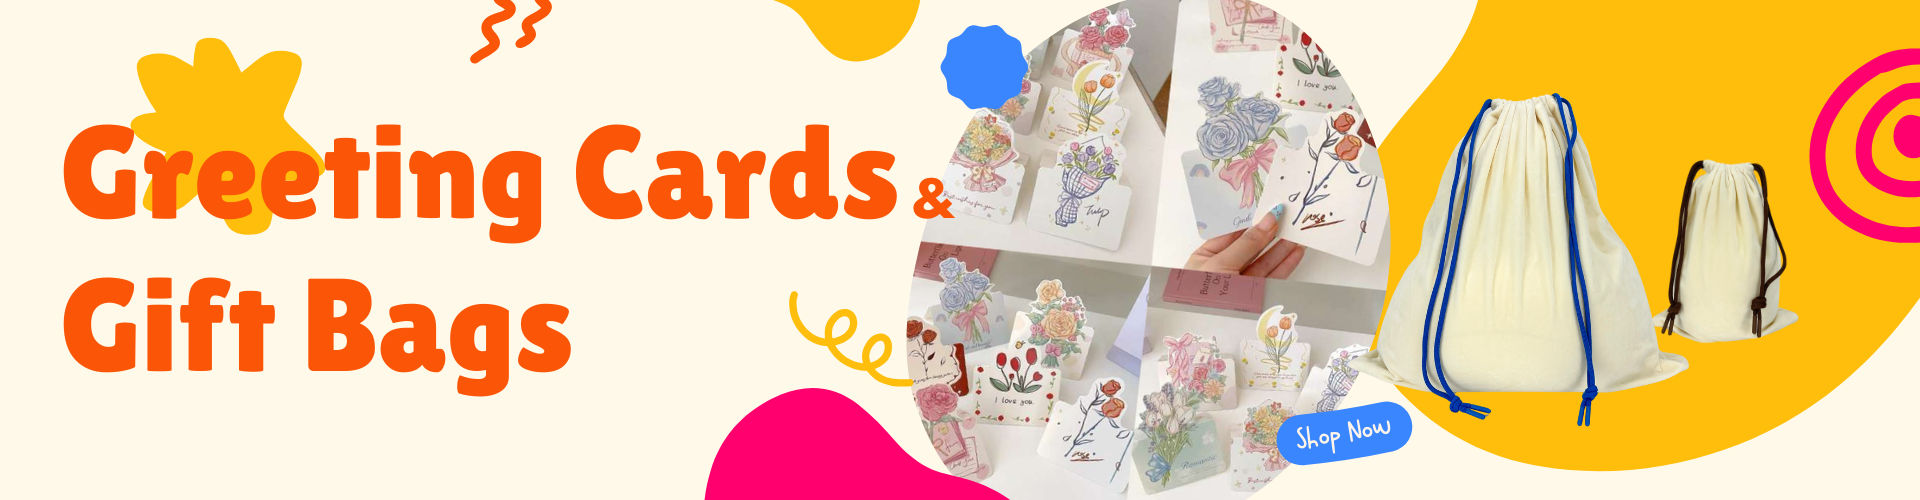 Greeting Cards and Gift Bags